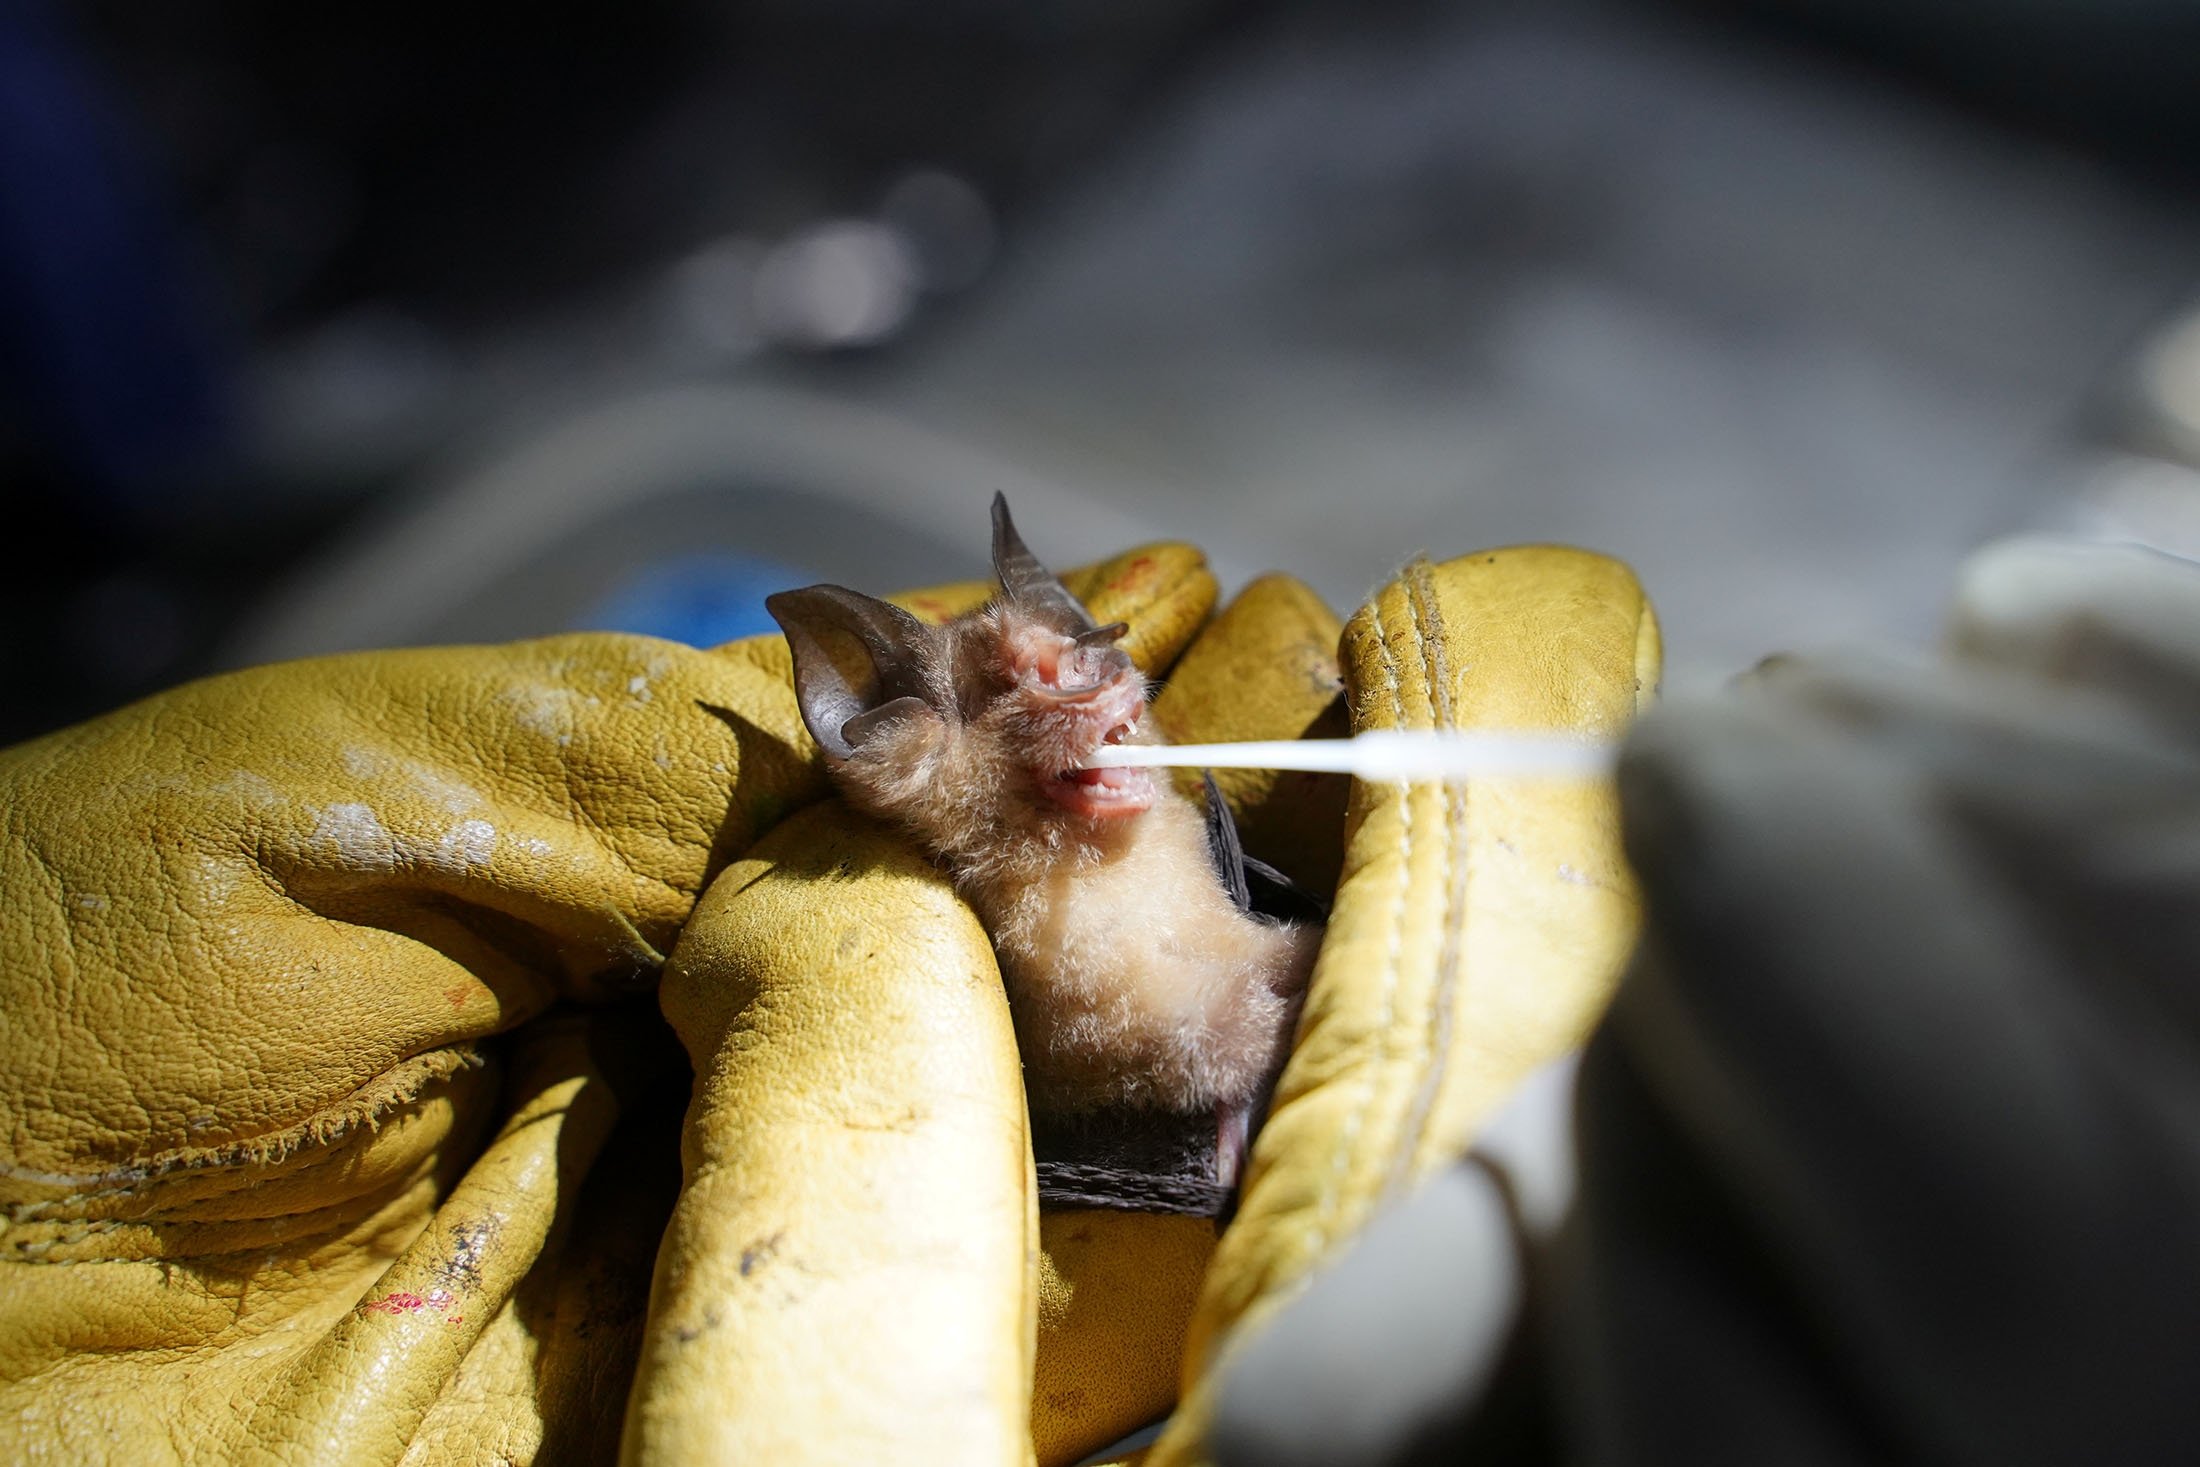 A researcher from the Institut Pasteur du Cambodge takes an oral swab from a bat that was captured at Chhngauk Hill in Thala Borivat District, Steung Treng Province, Cambodia, Aug. 30, 2021. (Reuters Photo)